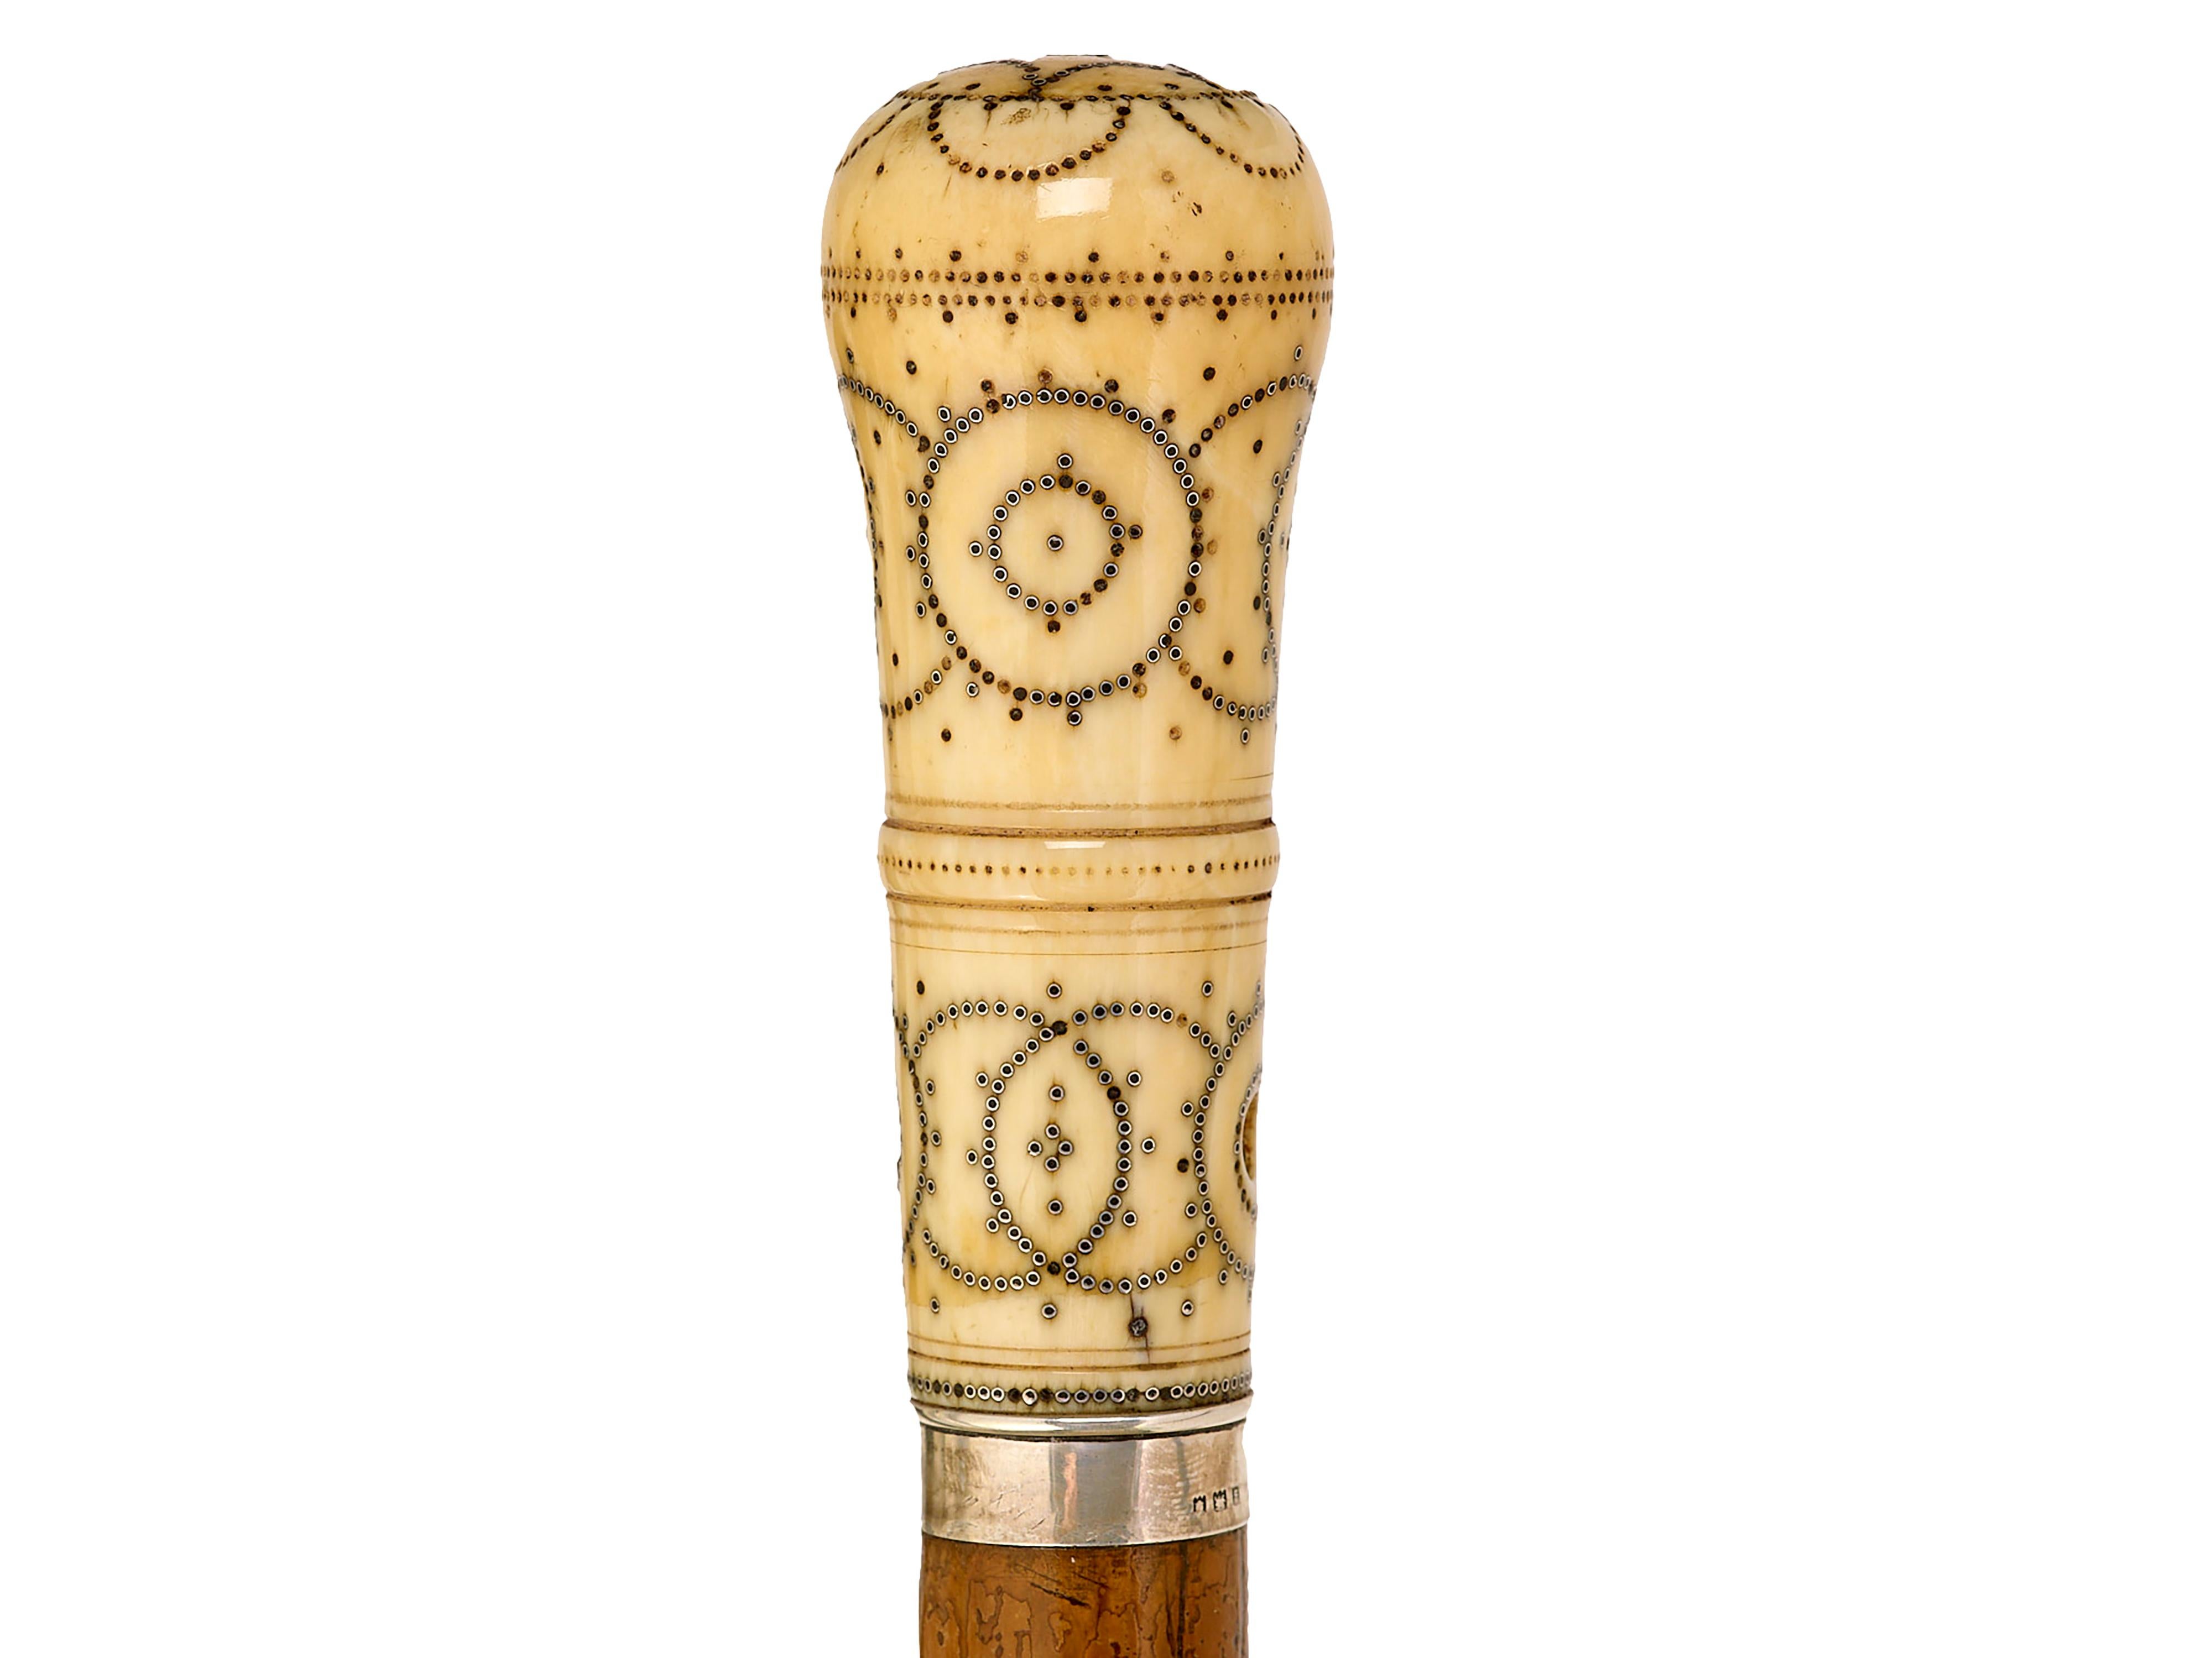 Walking cane 17th century with piquet decoration LU8492234907052
Fine piquet worked pommel, on malacca shaft with original ferrule. Circa 1690. 
Will be supplied with Ivory Submission Reference No.
L 92cm, w 4cm, d 4cm.
